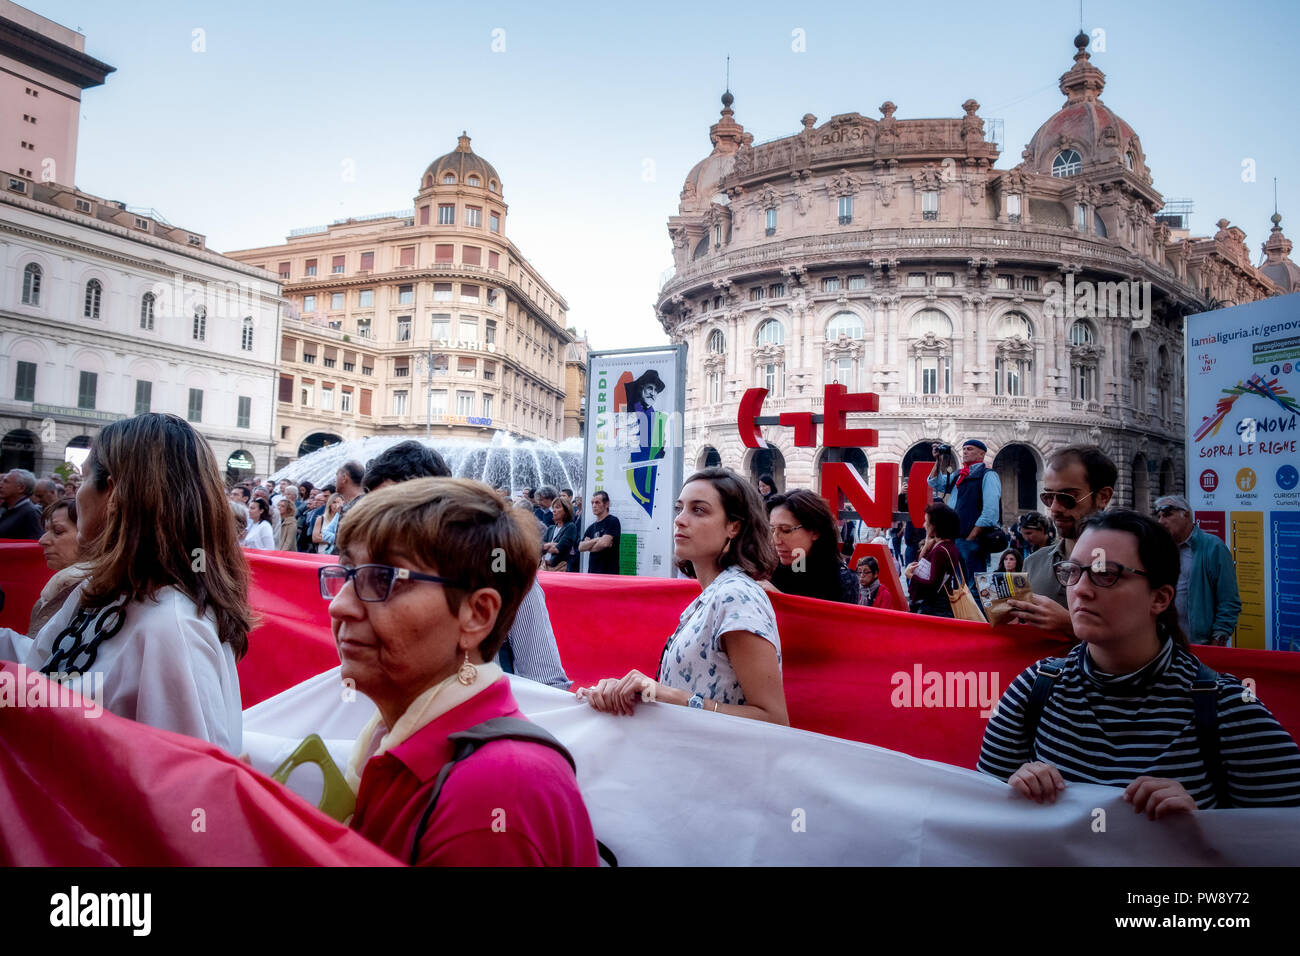 Genoa, Italy. 13th October, 2018. Demonstration by the citizens of Genoa, two months after the collapse of the Morandi bridge, asking for more help and more attention from the entire civil and political world to solve the great problems of the population. Genoa, Italy. © Emanuele Dello Strologo / Awakening / Alamy Live News Stock Photo